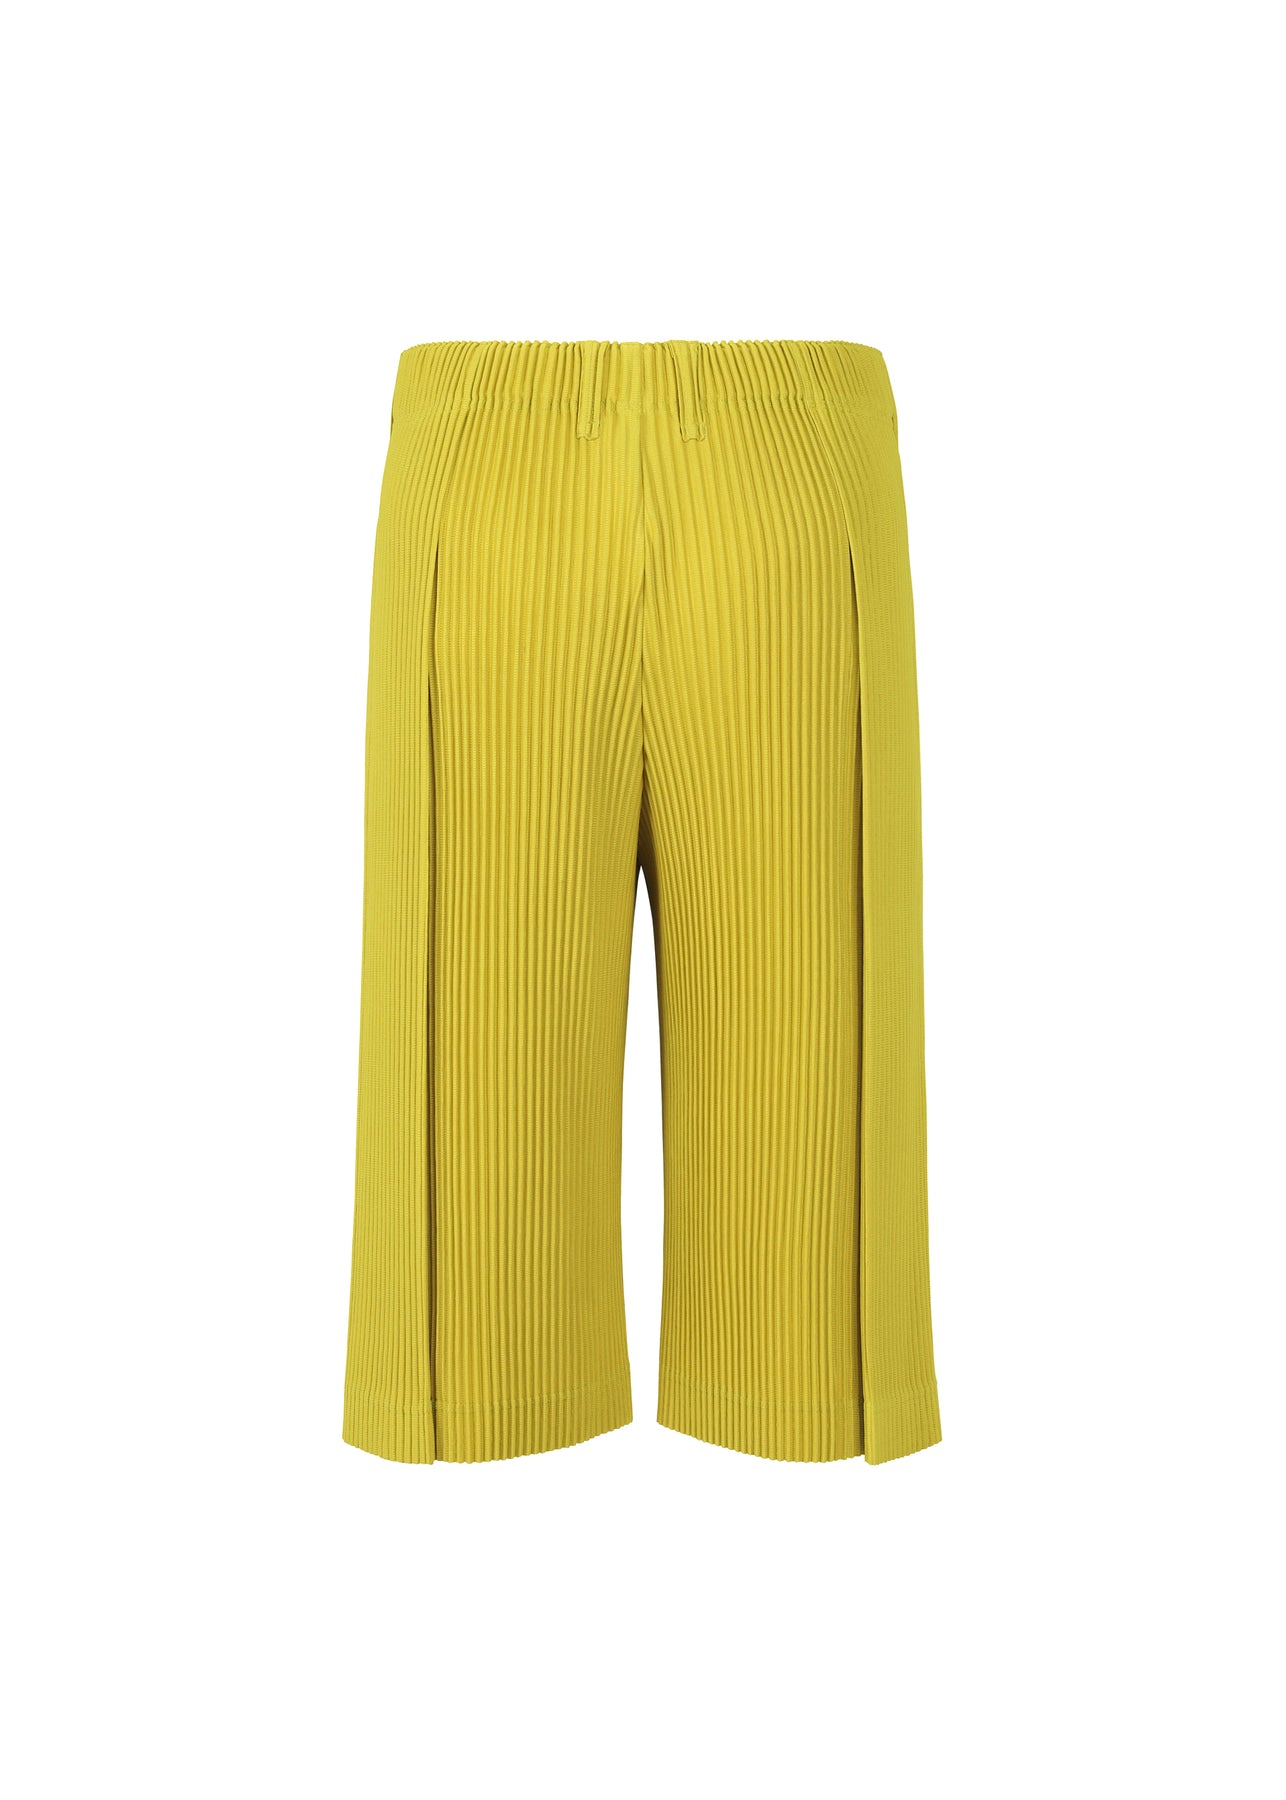 TAILORED PLEATS 2 PANTS | The official ISSEY MIYAKE ONLINE STORE 